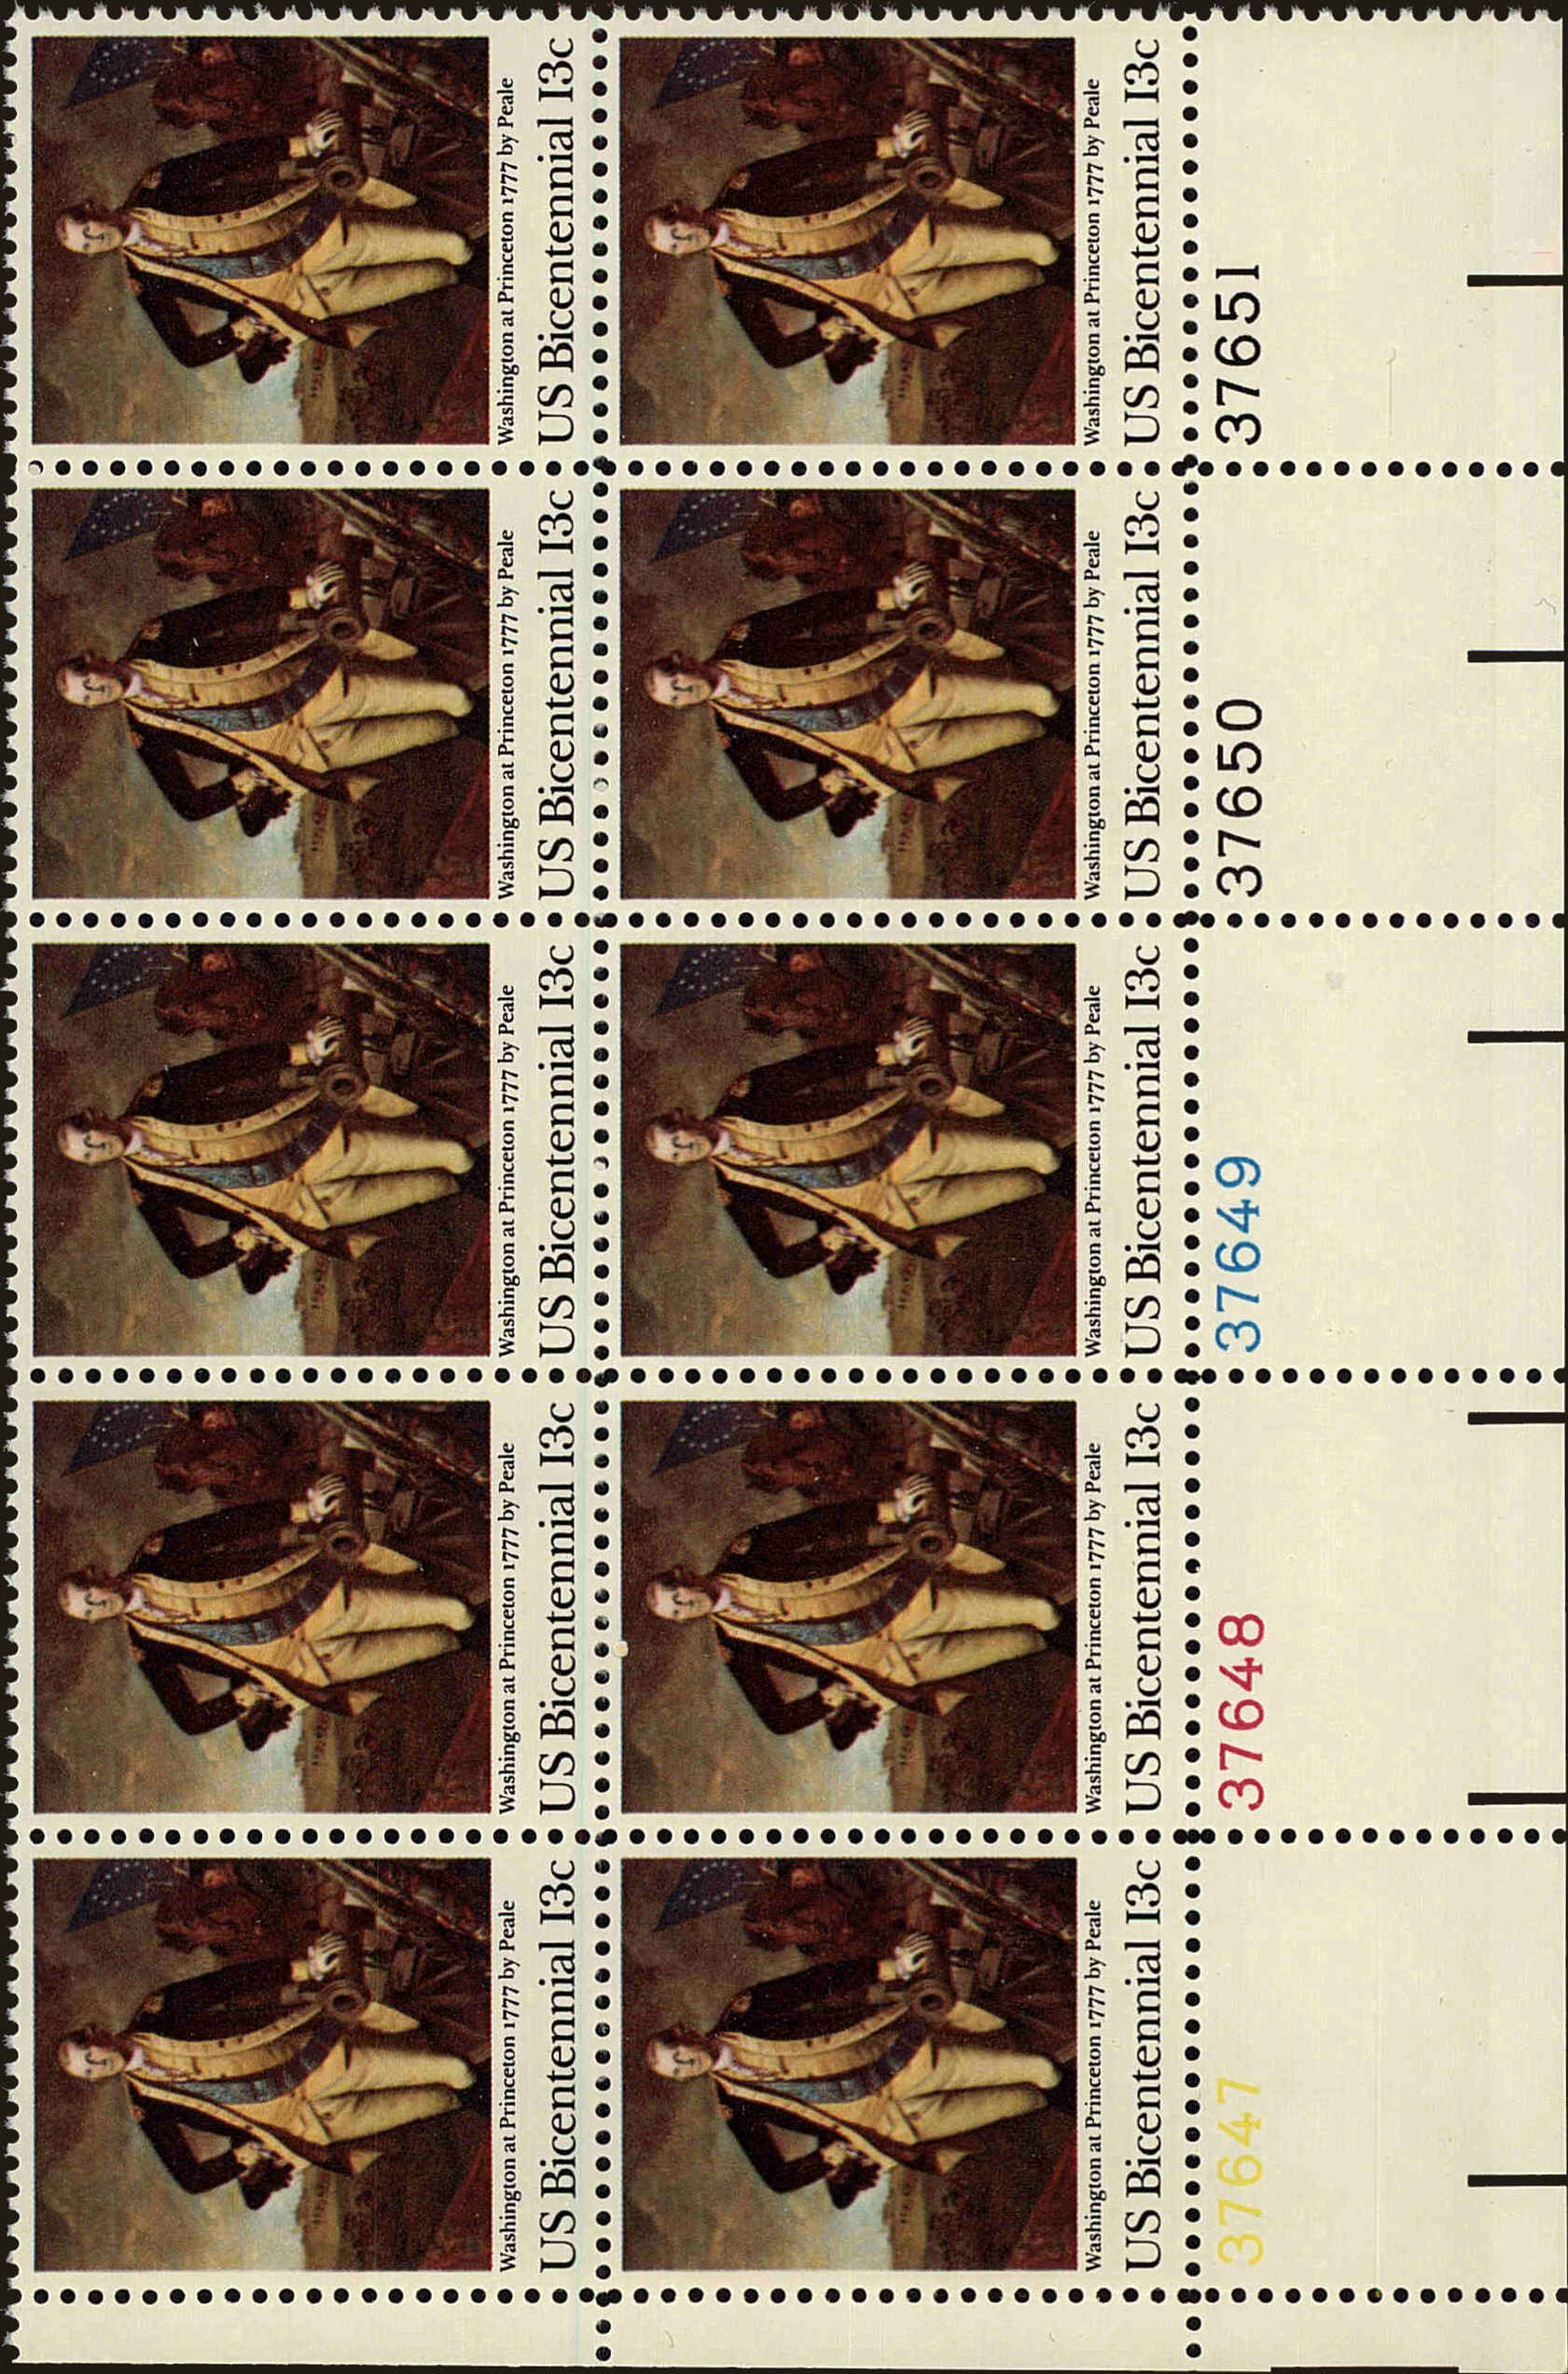 Front view of United States 1704 collectors stamp